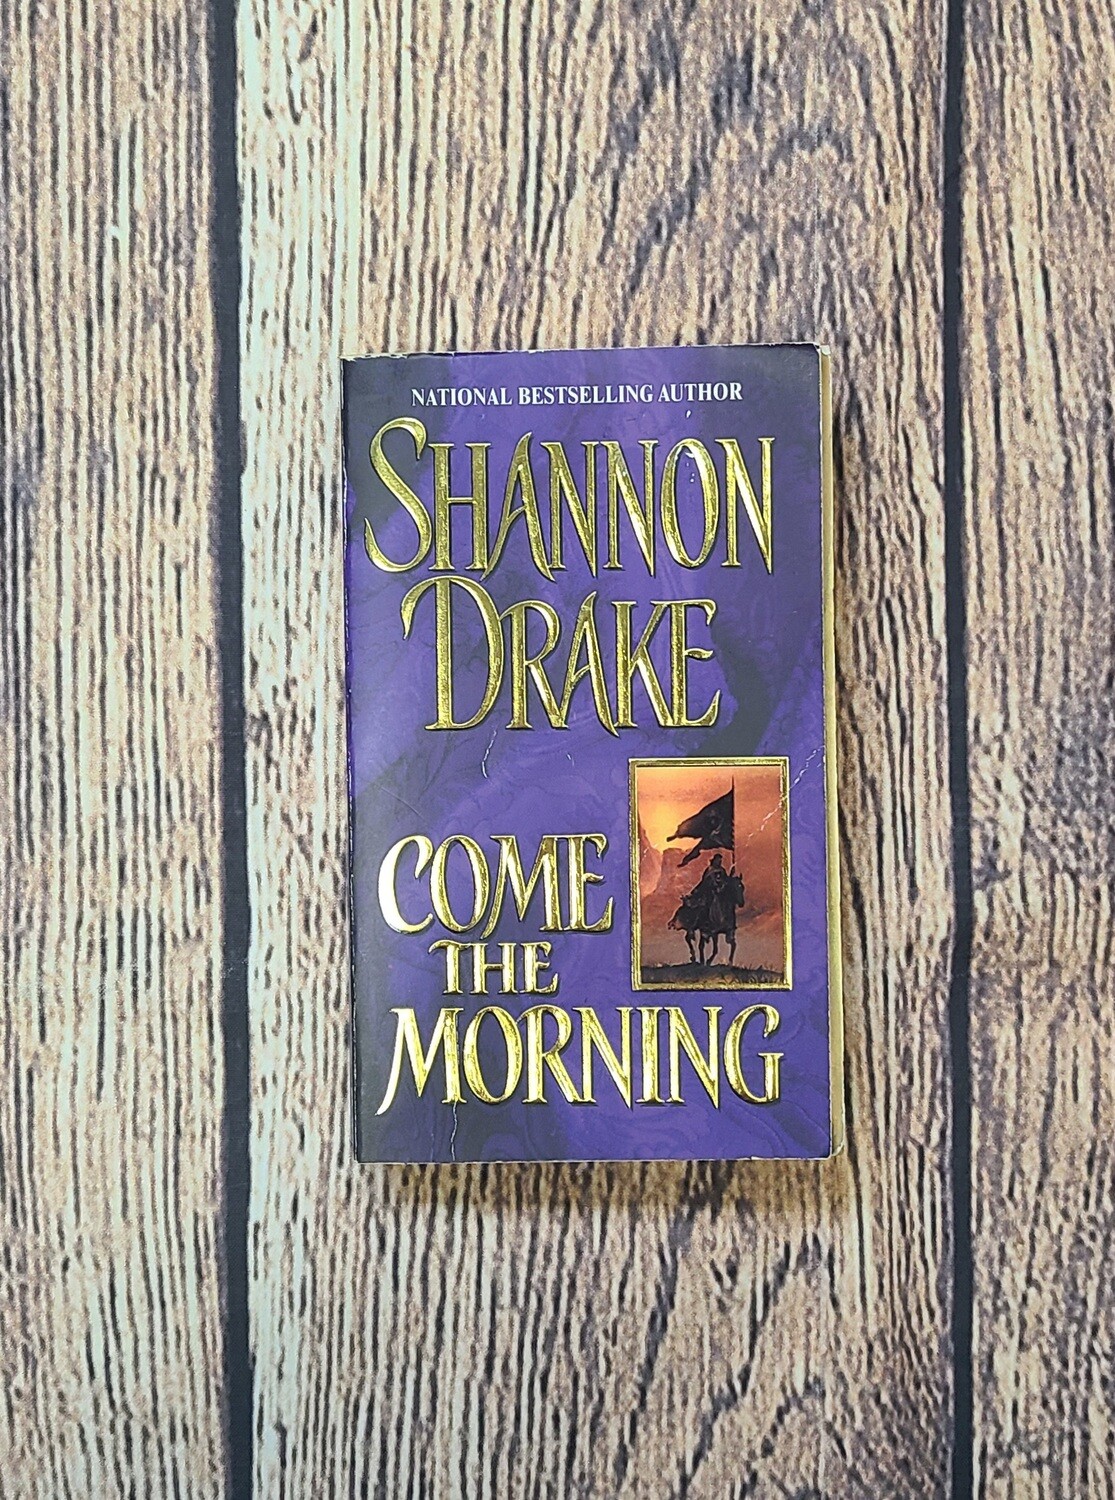 Come The Morning by Shannon Drake